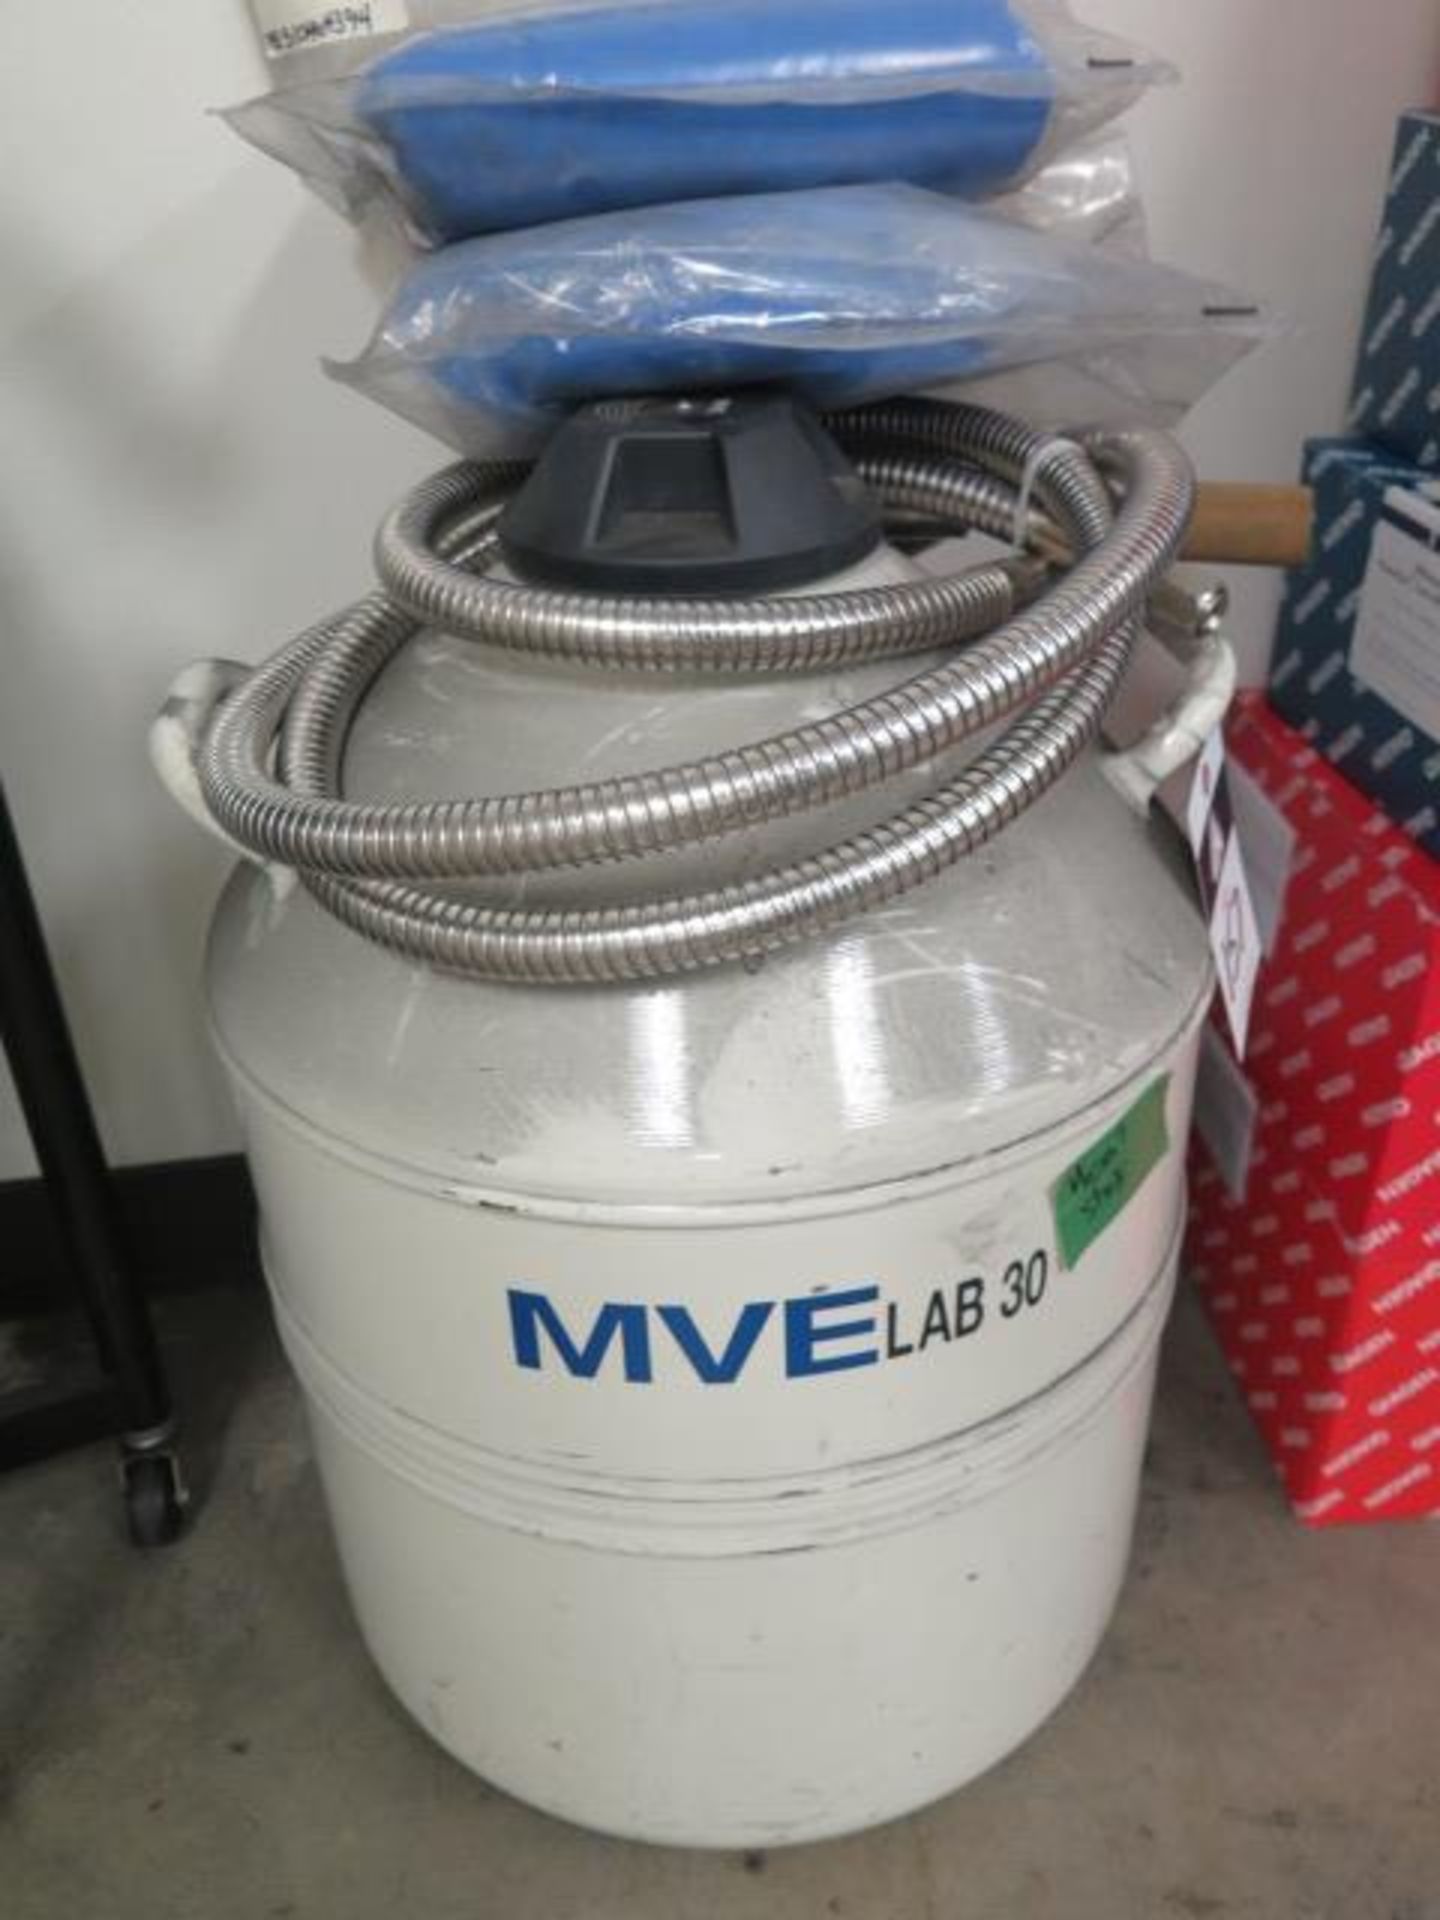 MVE Lab 30 Liquid Nitrogen Cryogenic Dewar, SOLD AS IS AND WITH NO WARRANTY - Image 2 of 3